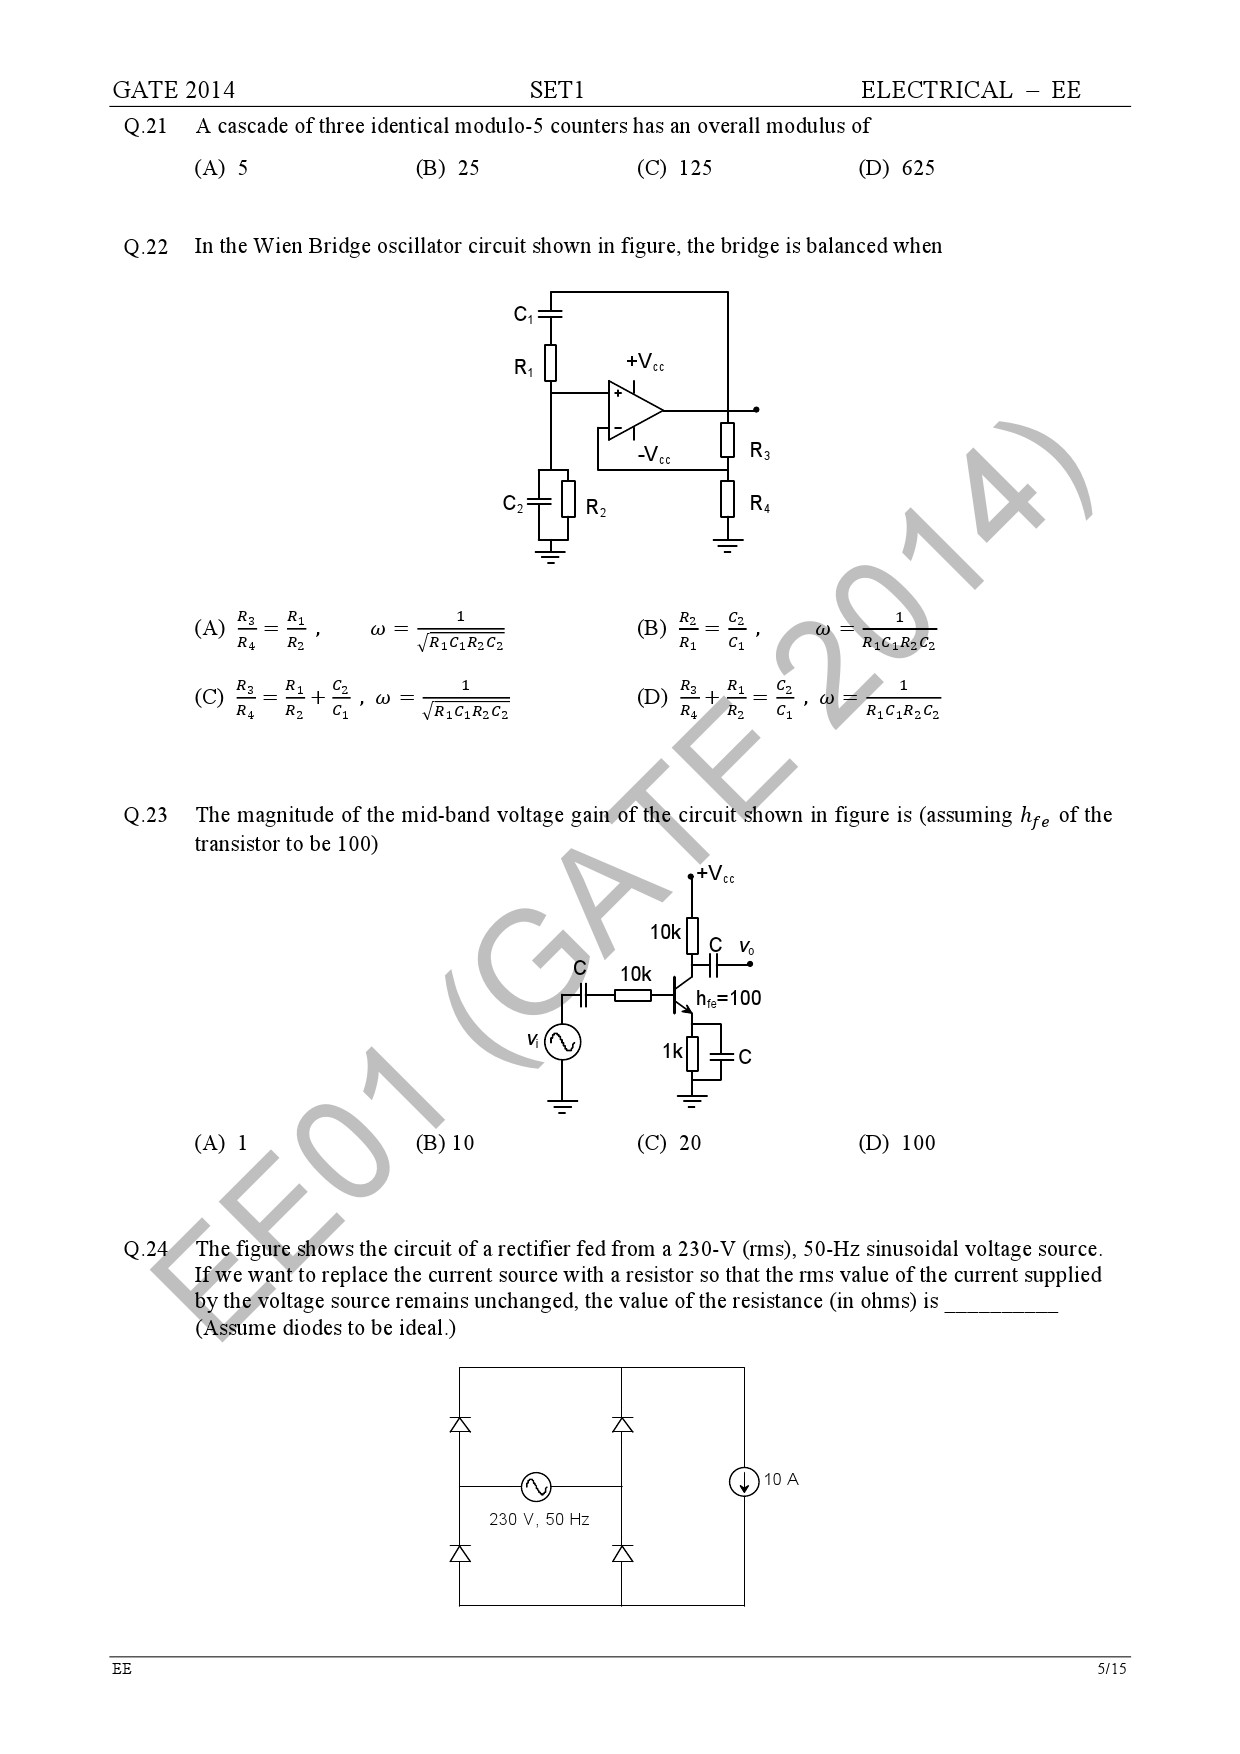 GATE Exam Question Paper 2014 Electrical Engineering Set 1 11